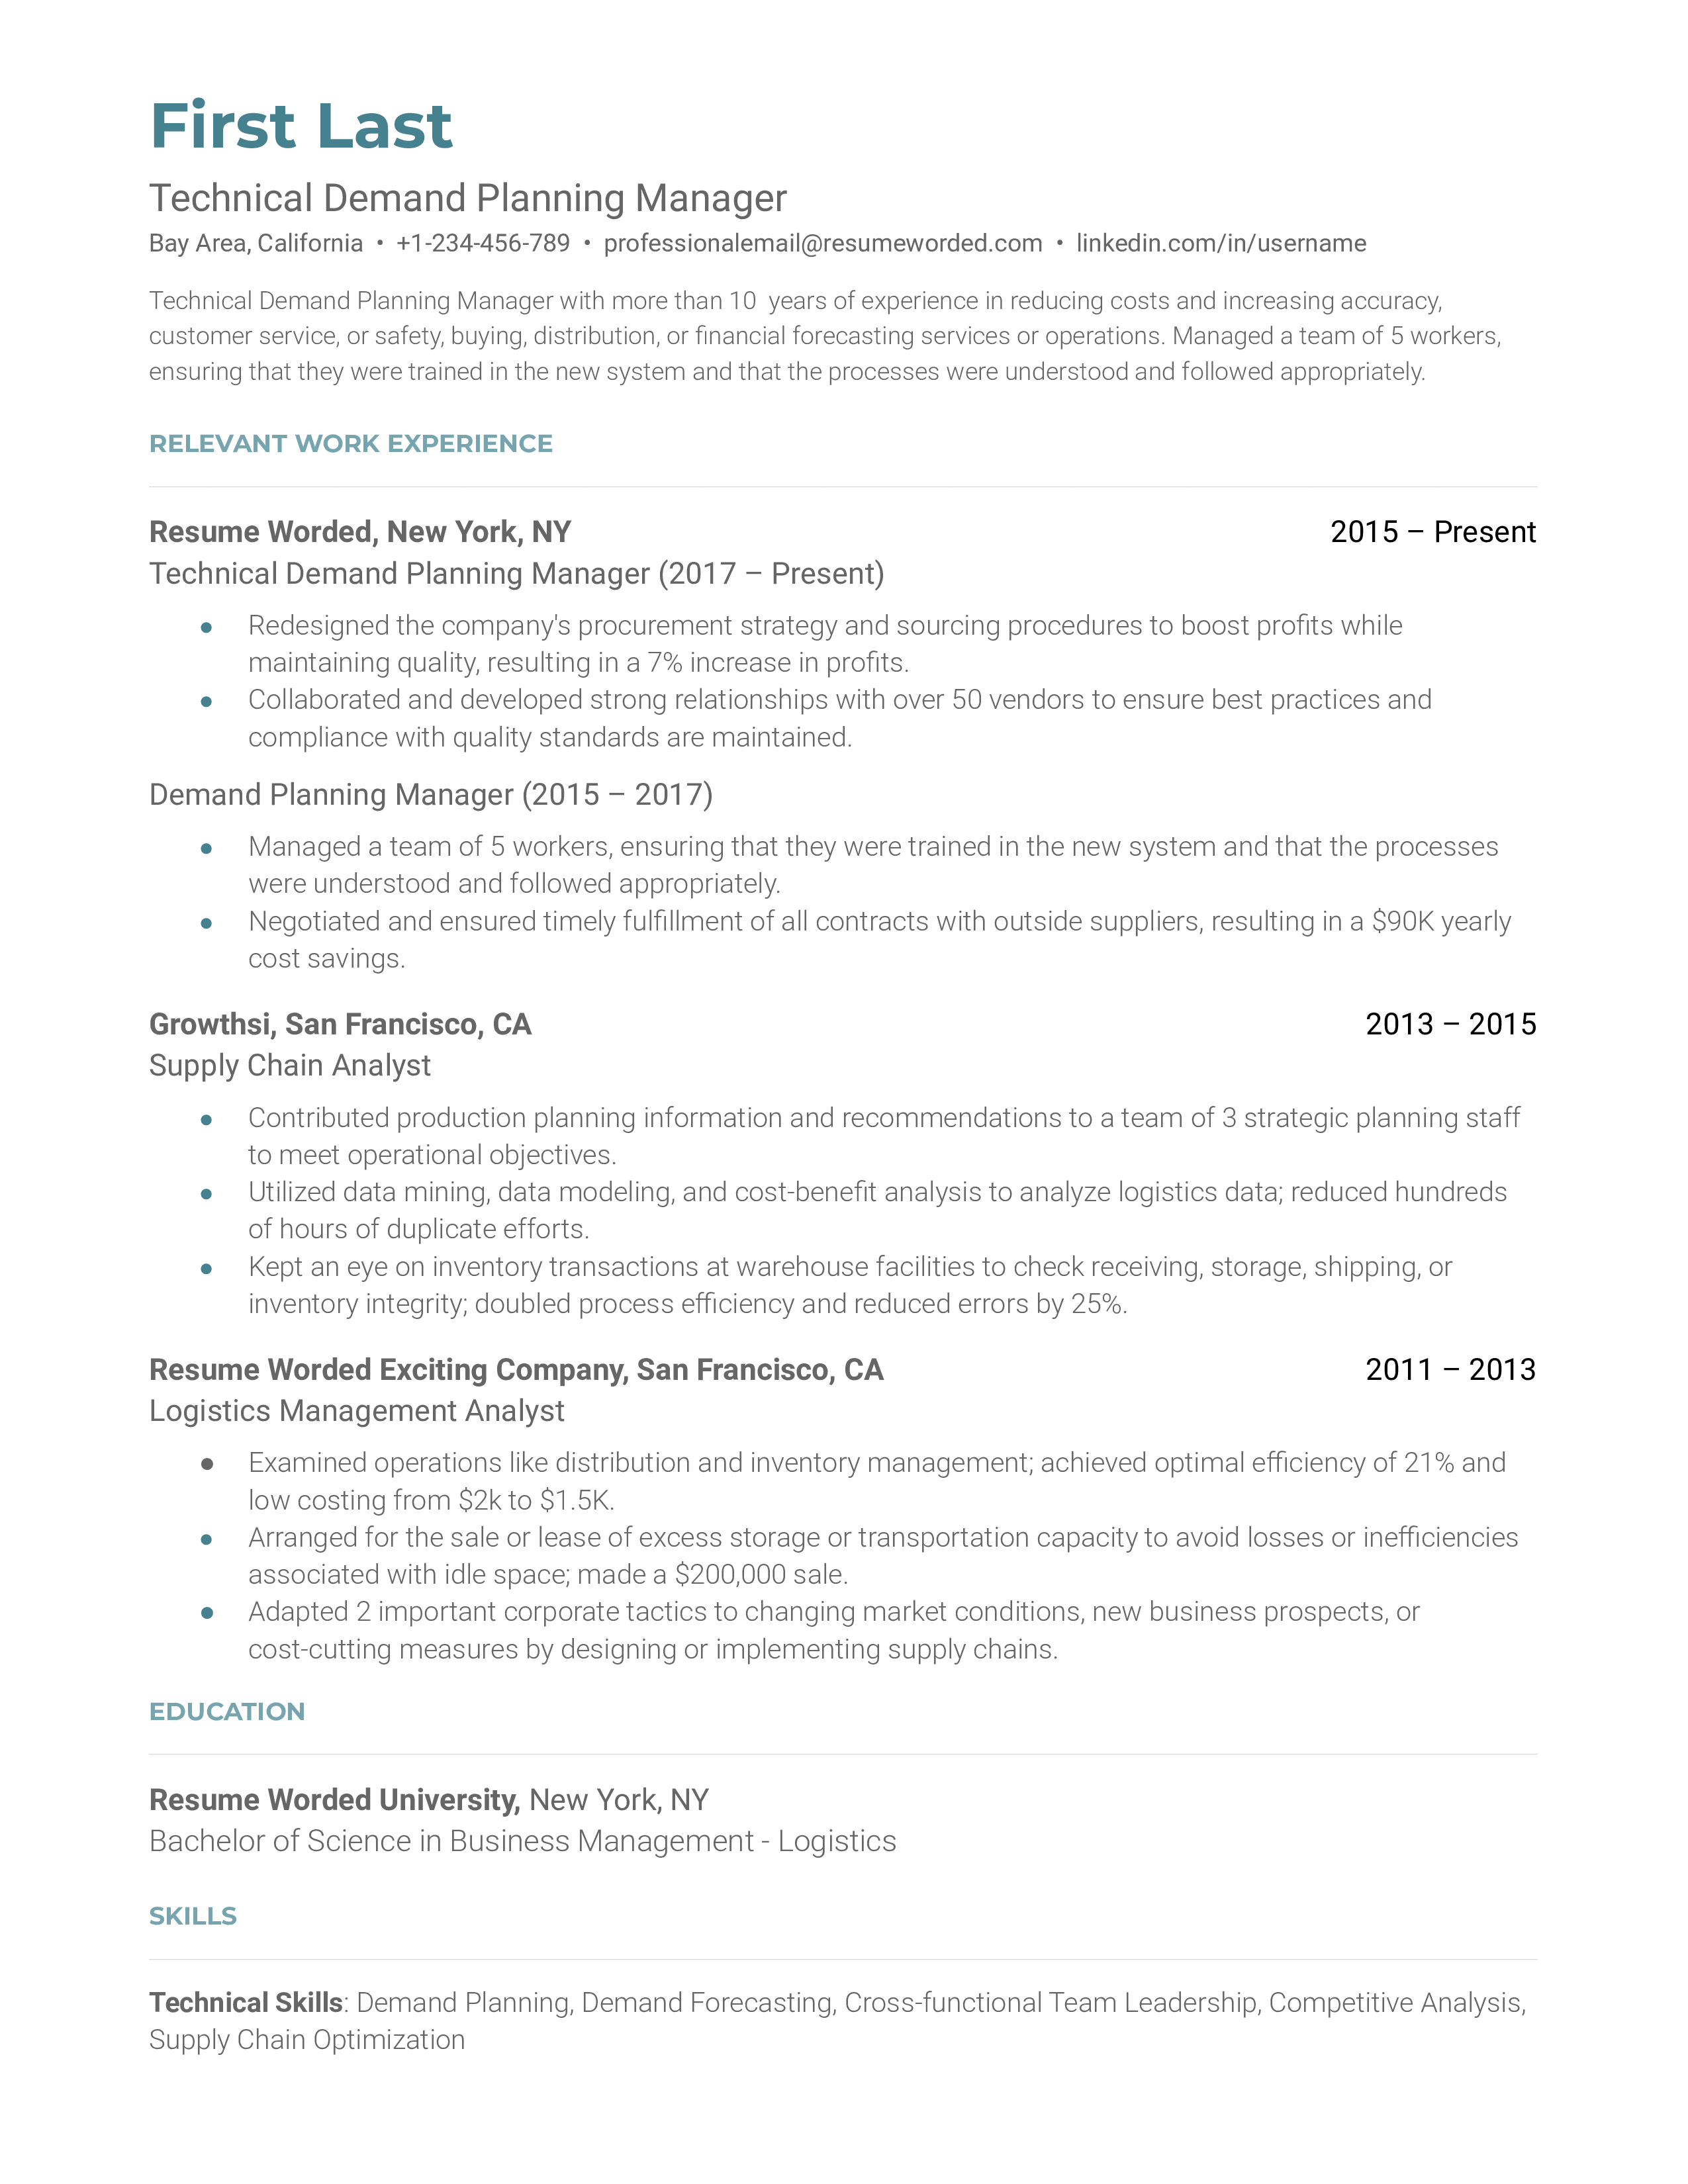 Technical Demand Planning Manager Resume Sample